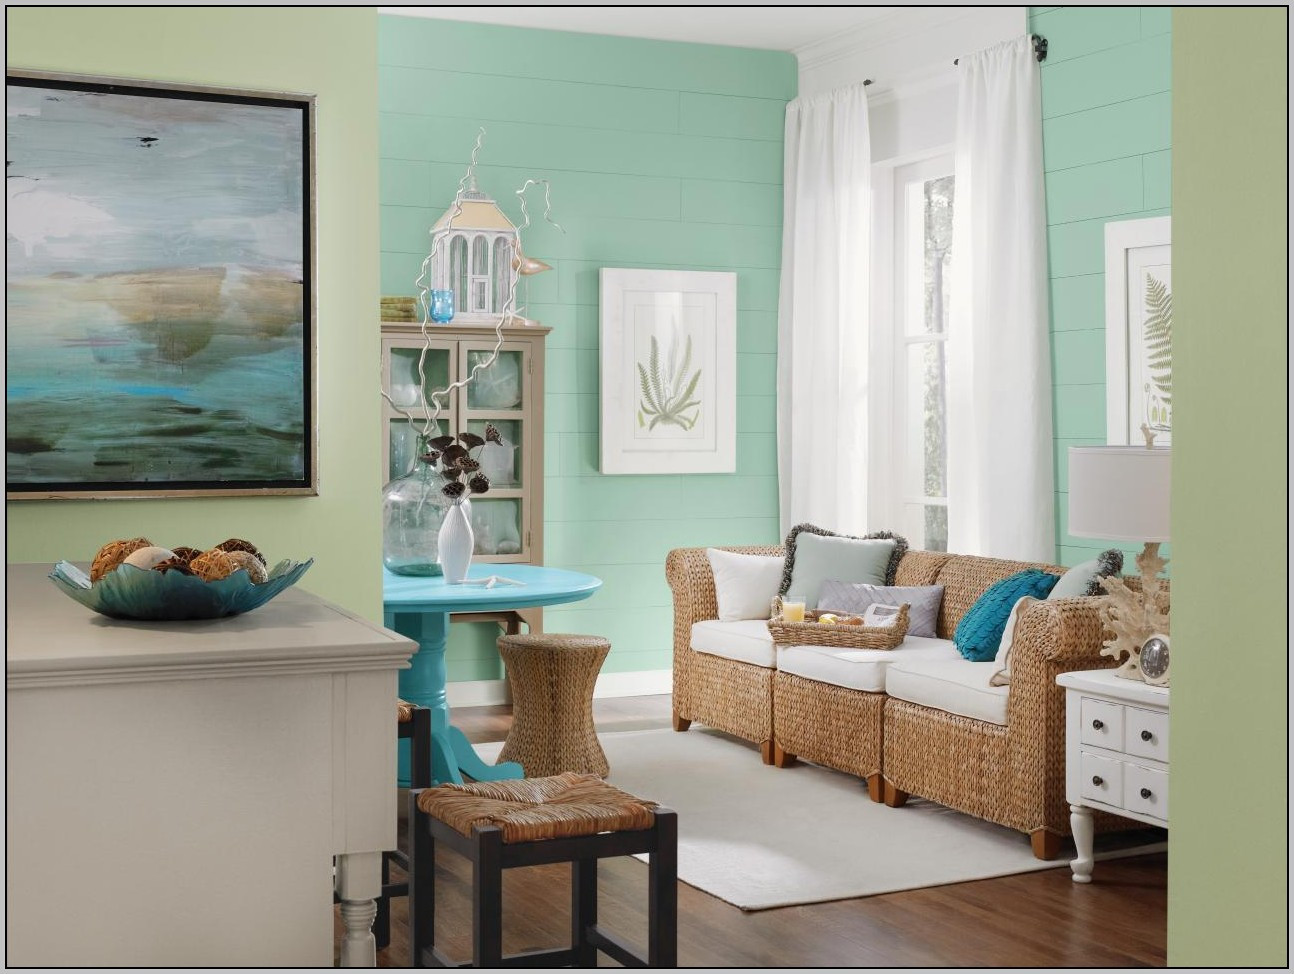 Living Room Paint Color Idea
 Are the Living Room Paint Colors Really Important